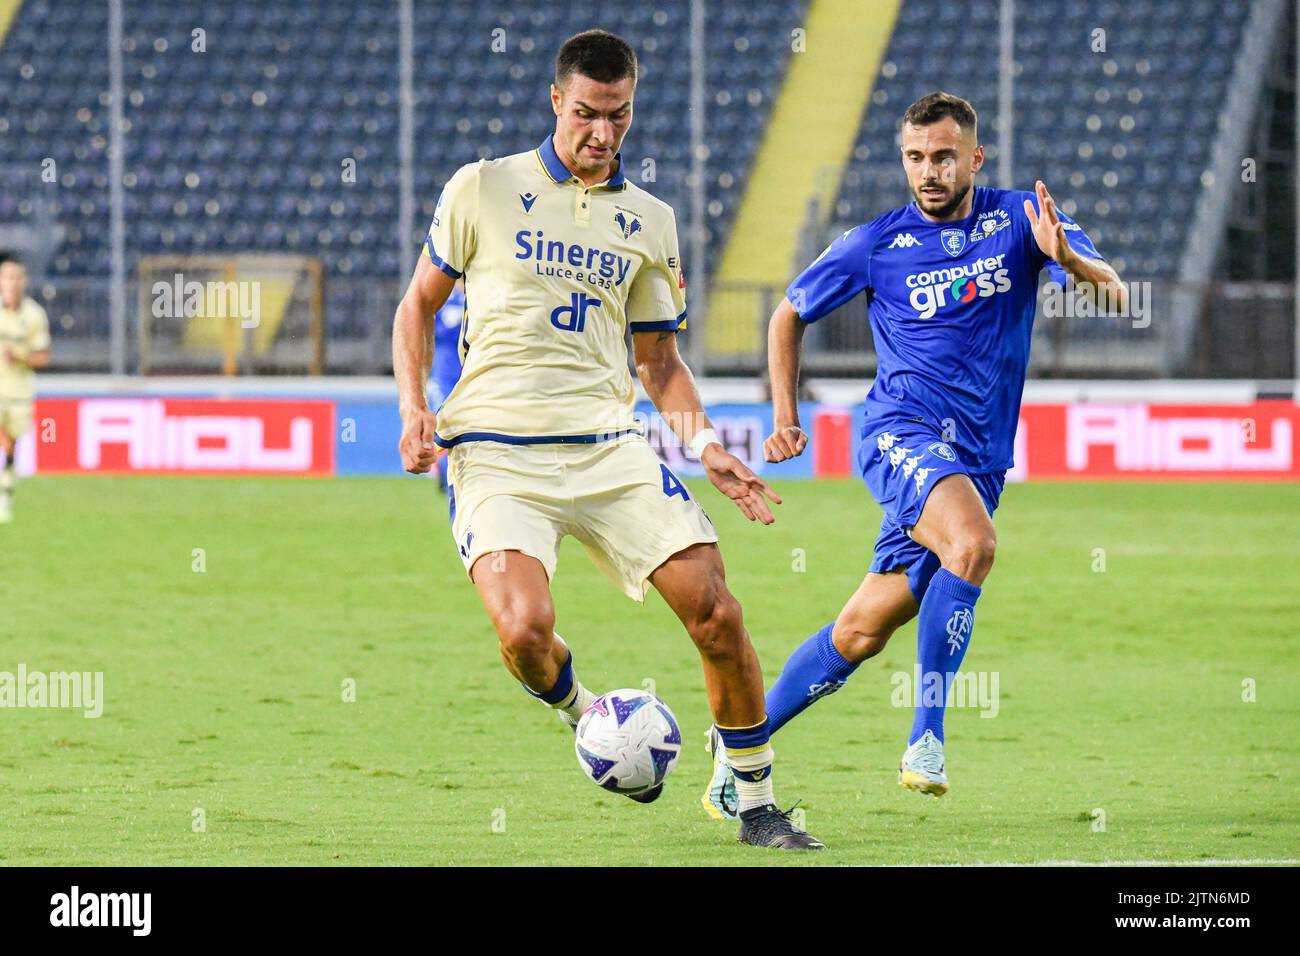 Empoli, Italy. 31st Aug, 2022. Hellas Verona's Miguel Pinto Veloso protects the ball against Empoliâ&#x80;&#x99;s Nedim Bajrami during Empoli FC vs Hellas Verona, italian soccer Serie A match in Empoli, Italy, August 31 2022 Credit: Independent Photo Agency/Alamy Live News Stock Photo